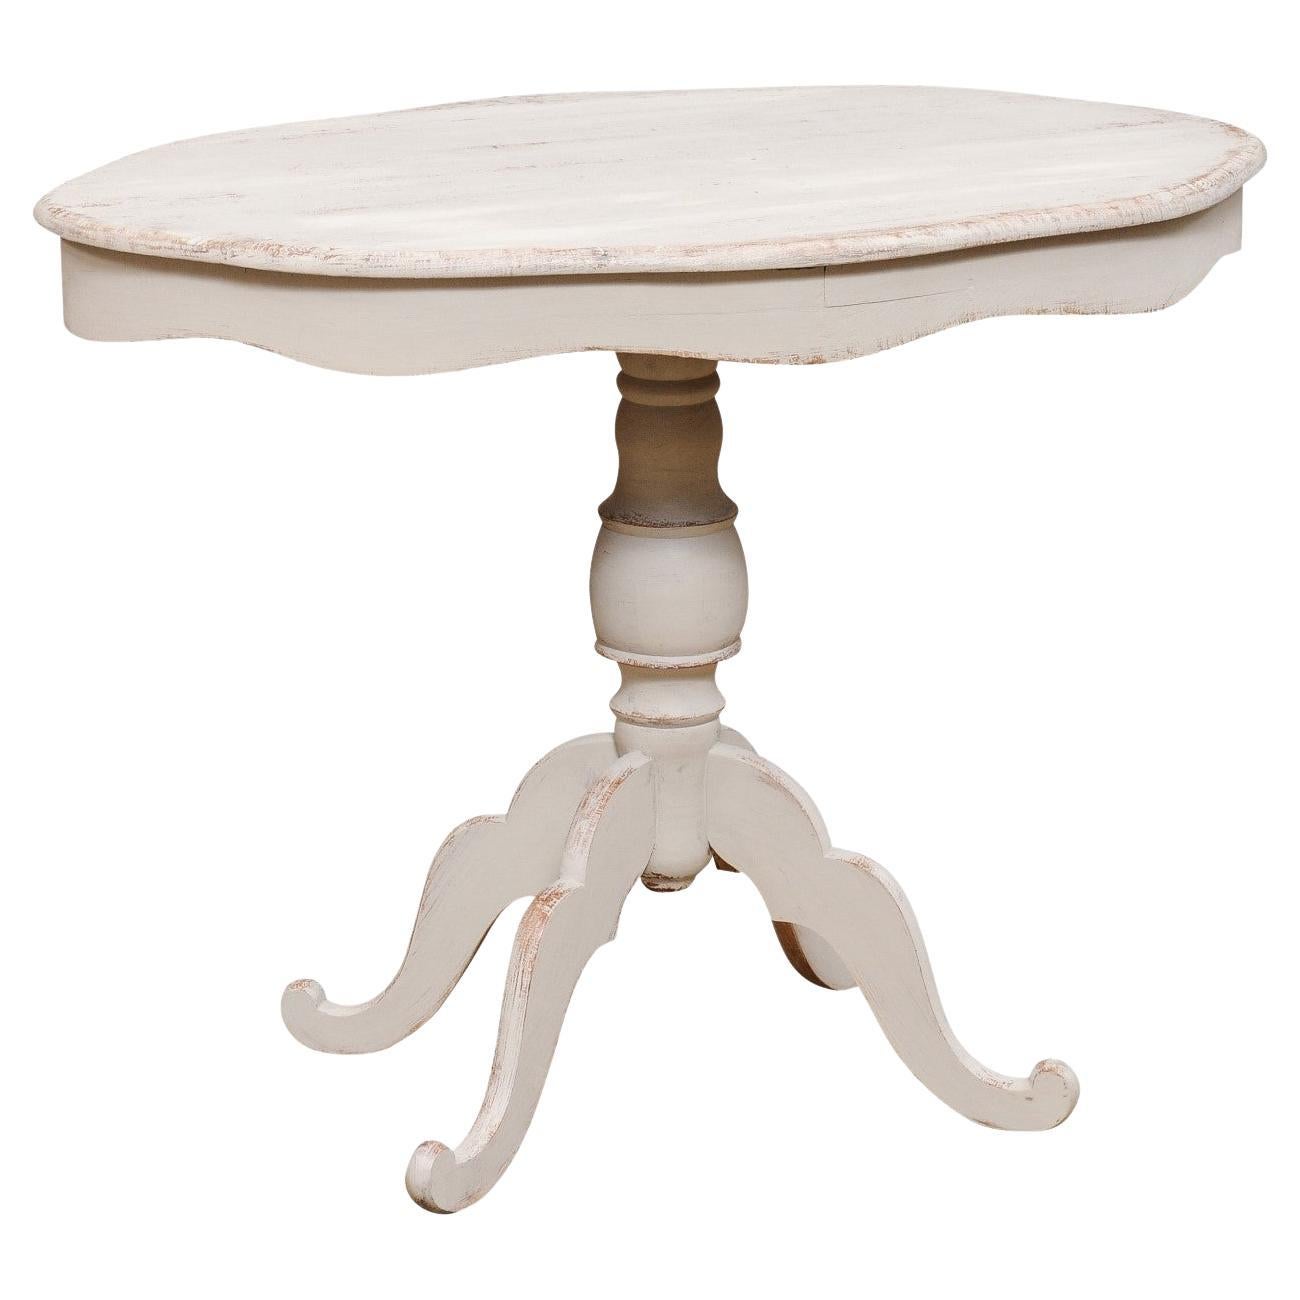 Swedish 1860s Painted Oval Pedestal Table with Carved Apron and Quadripod Base For Sale